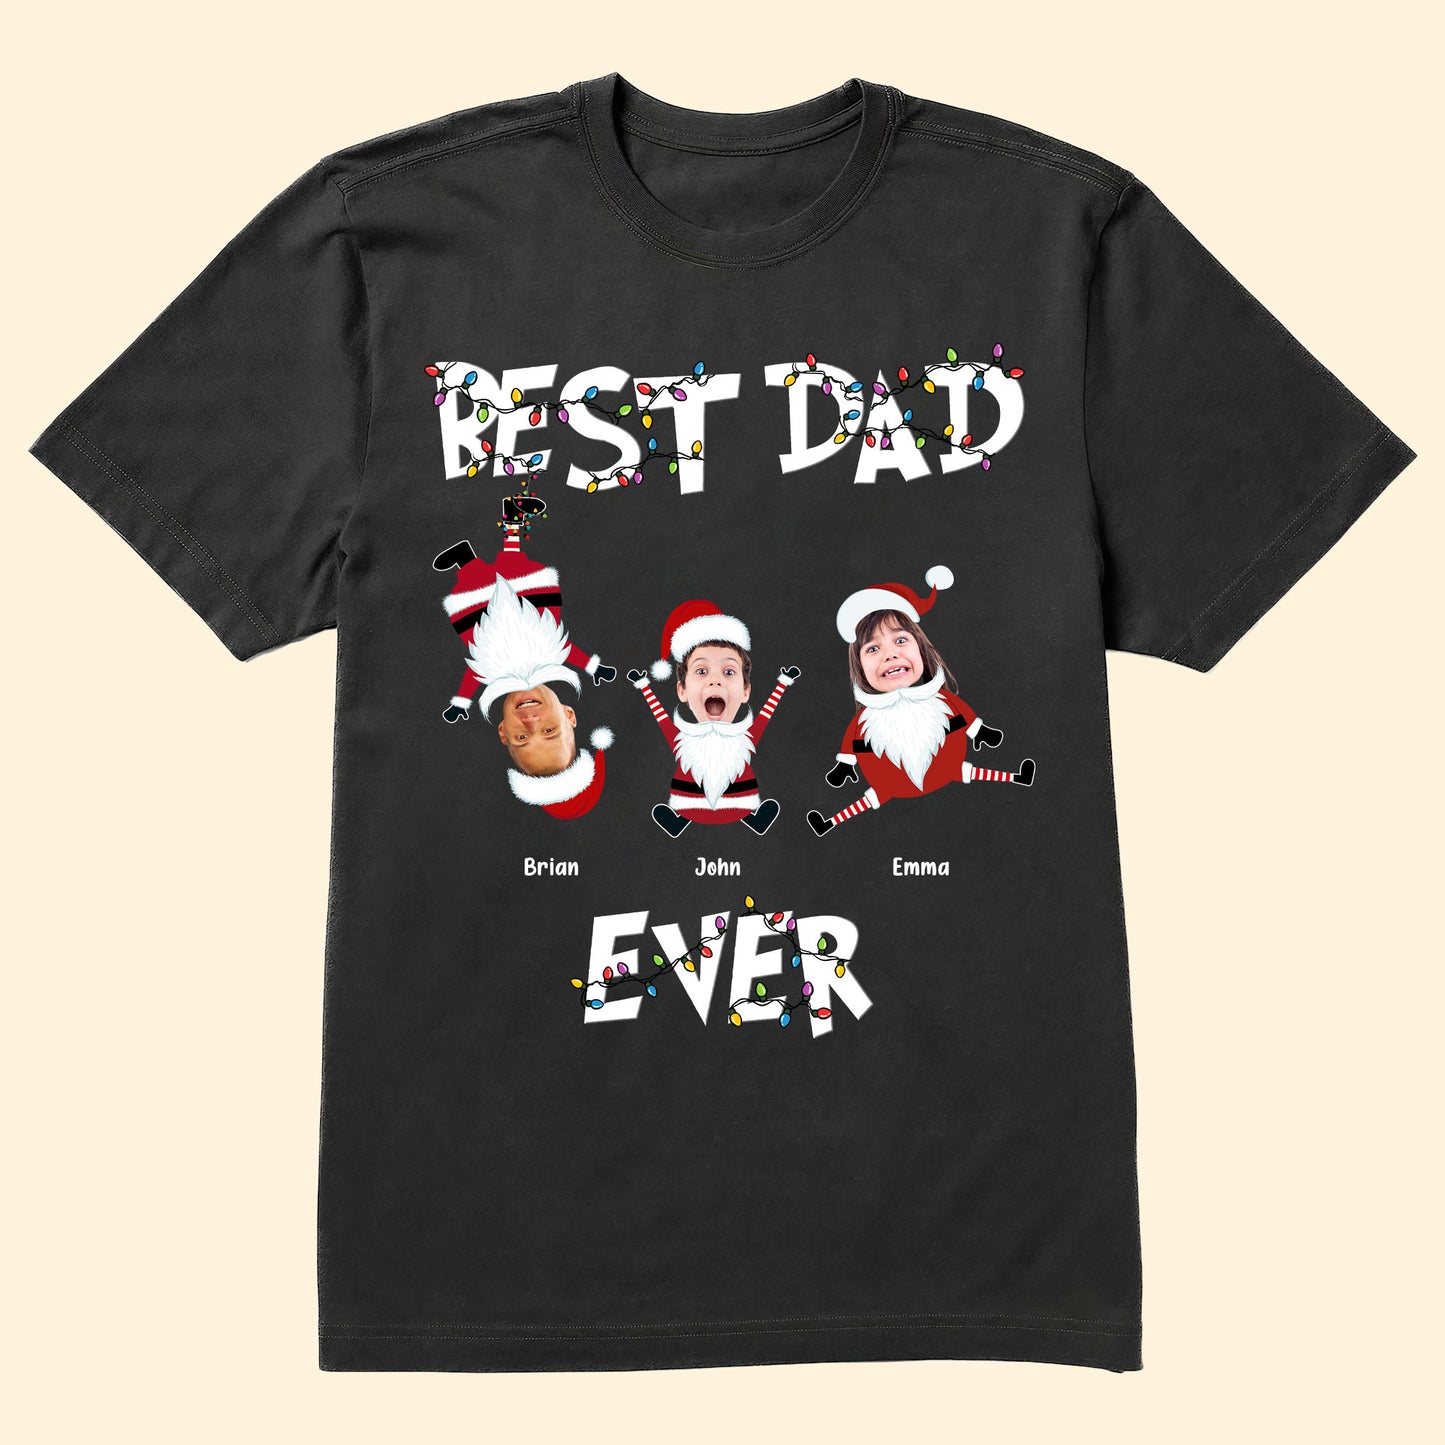 Best Dad Ever Christmas Gift - Personalized Photo Shirt